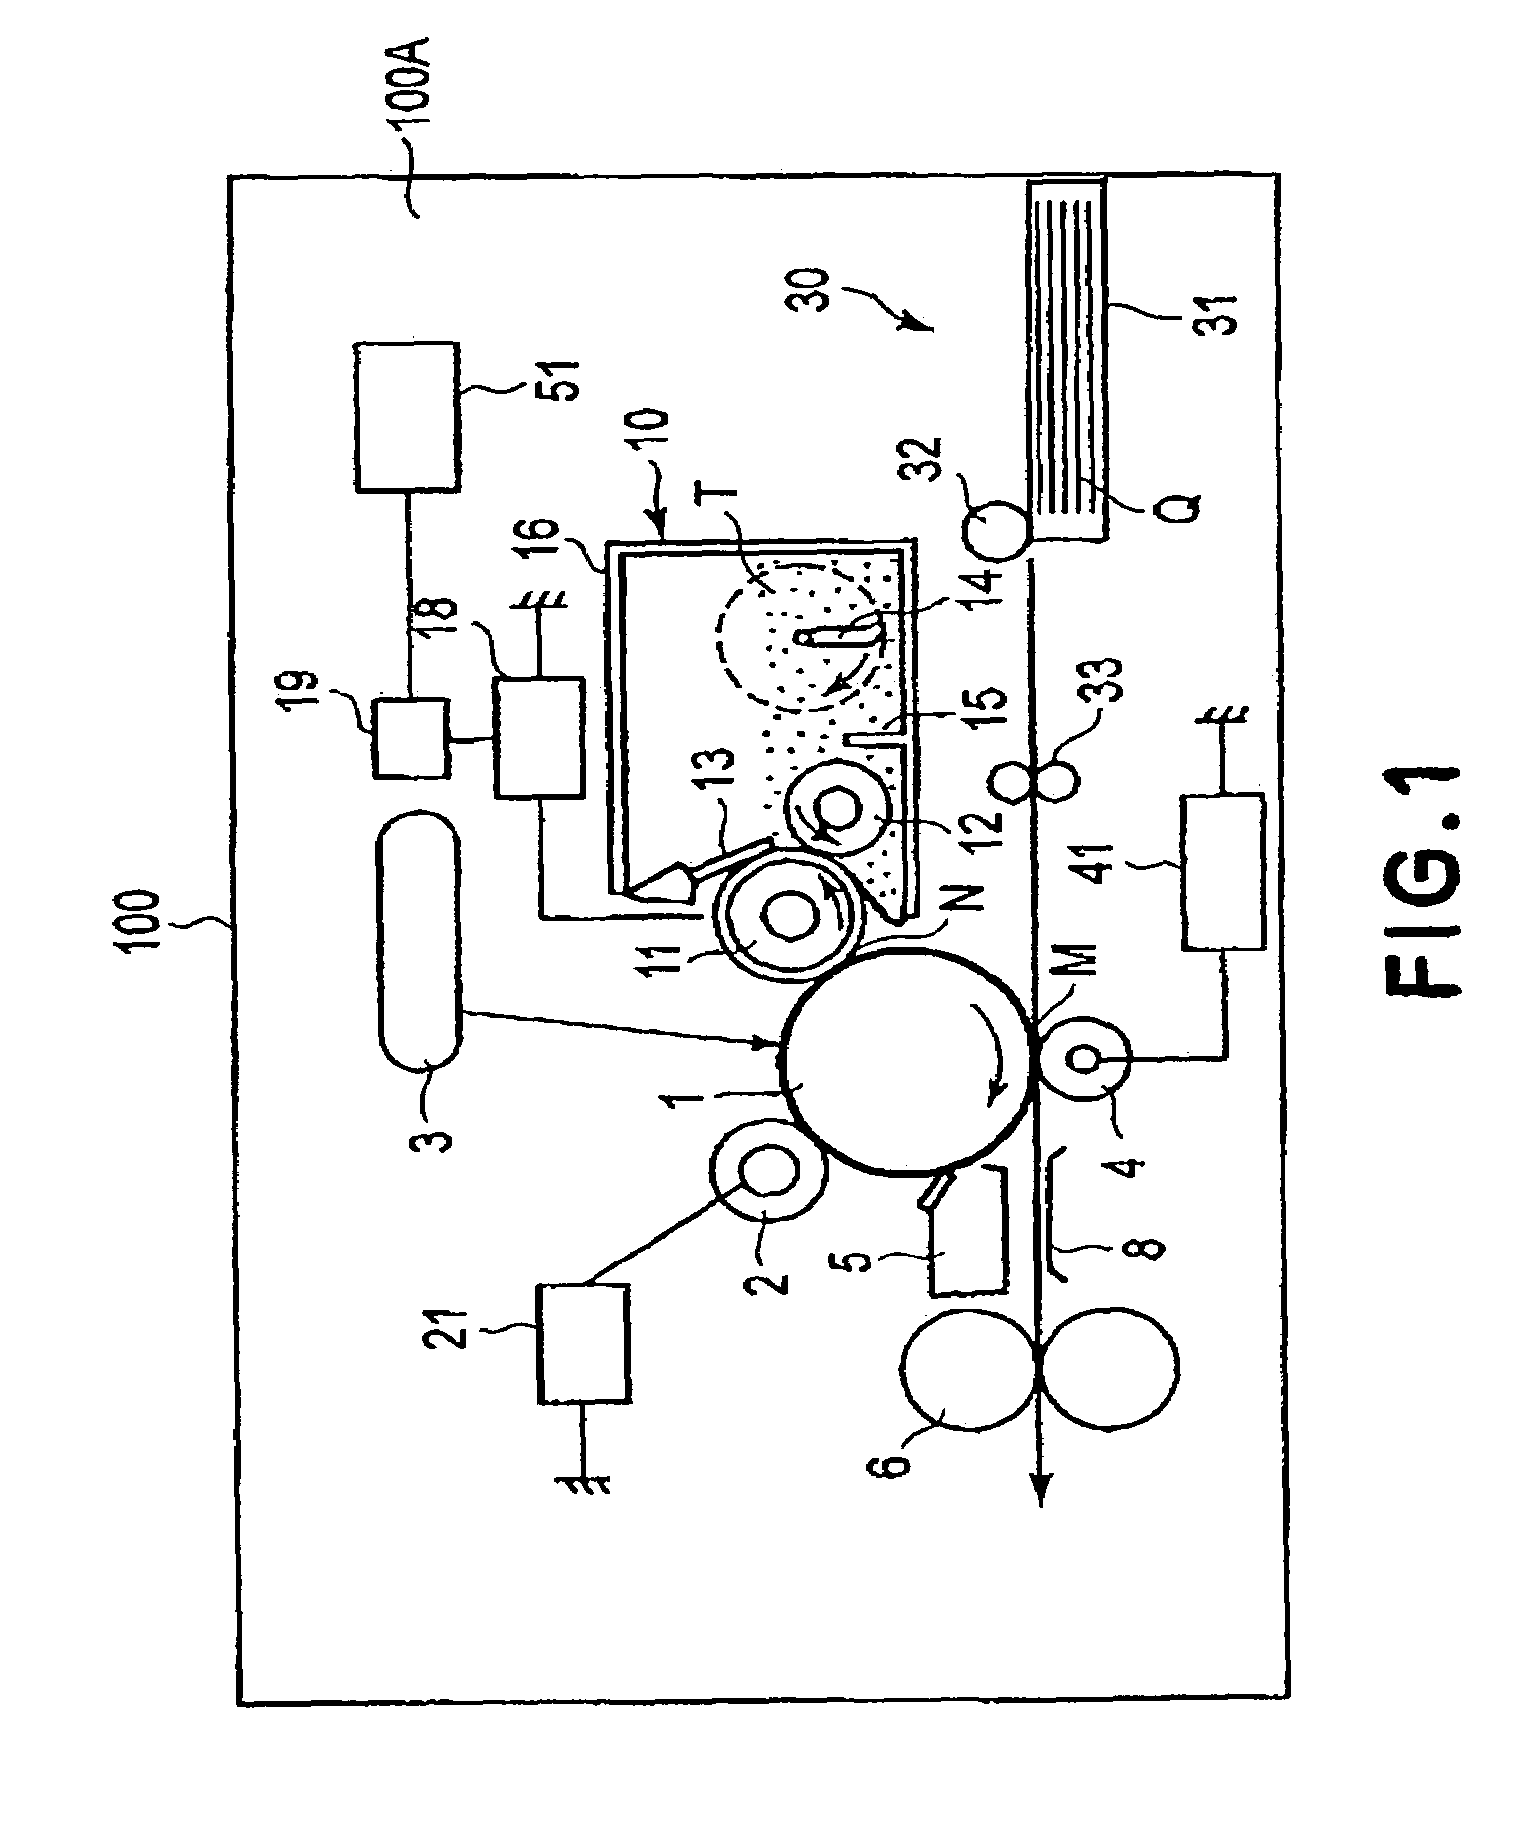 Image forming apparatus featuring a variable oscillating electric field formed between a developer carrying member and an image bearing member during a developer operation in accordance with a peripheral speed of the image bearing member